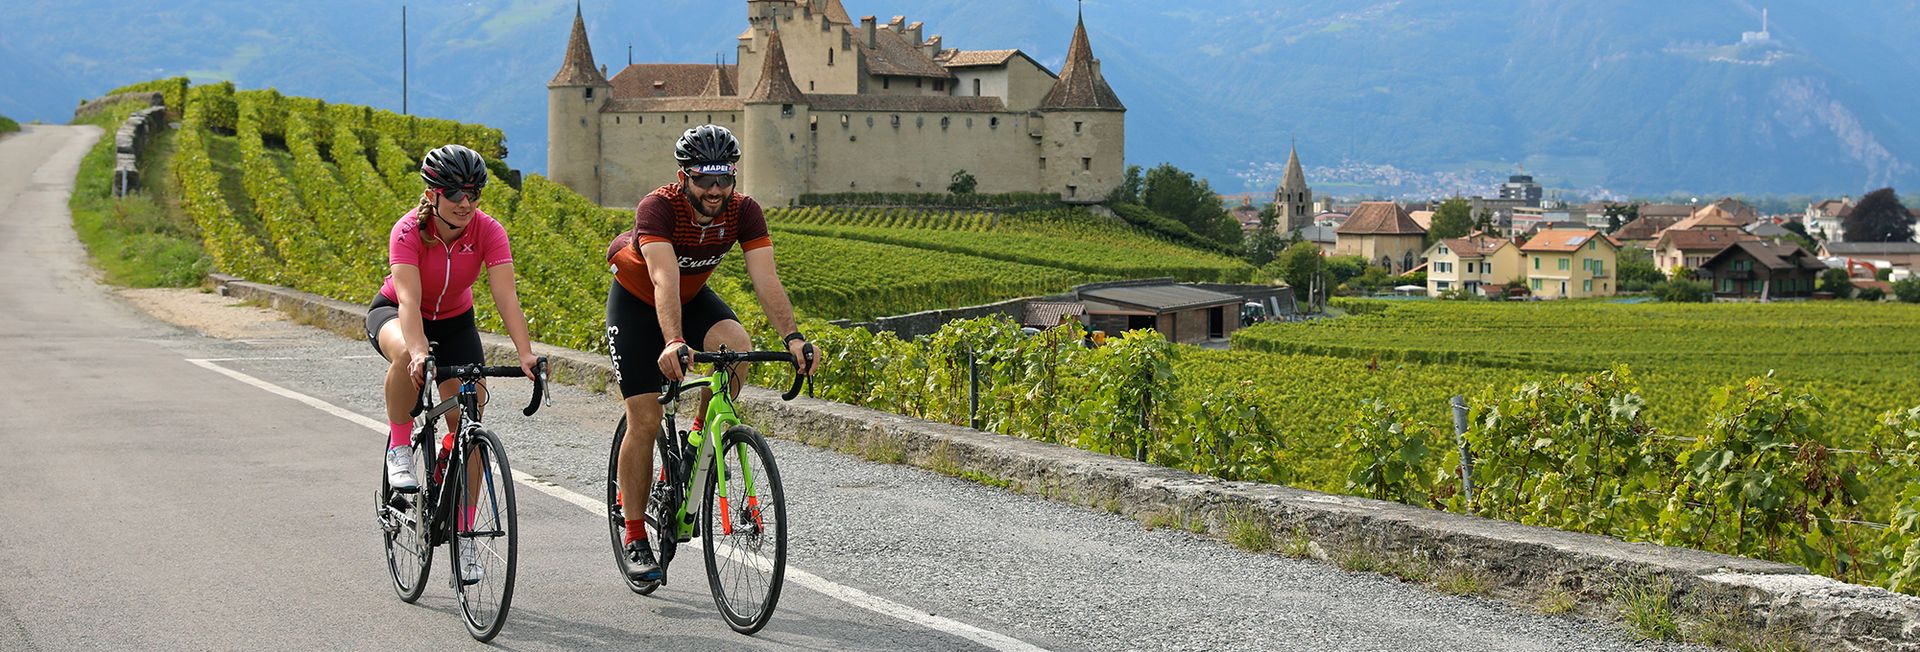 Road cyclist in front of the Château d'Aigle